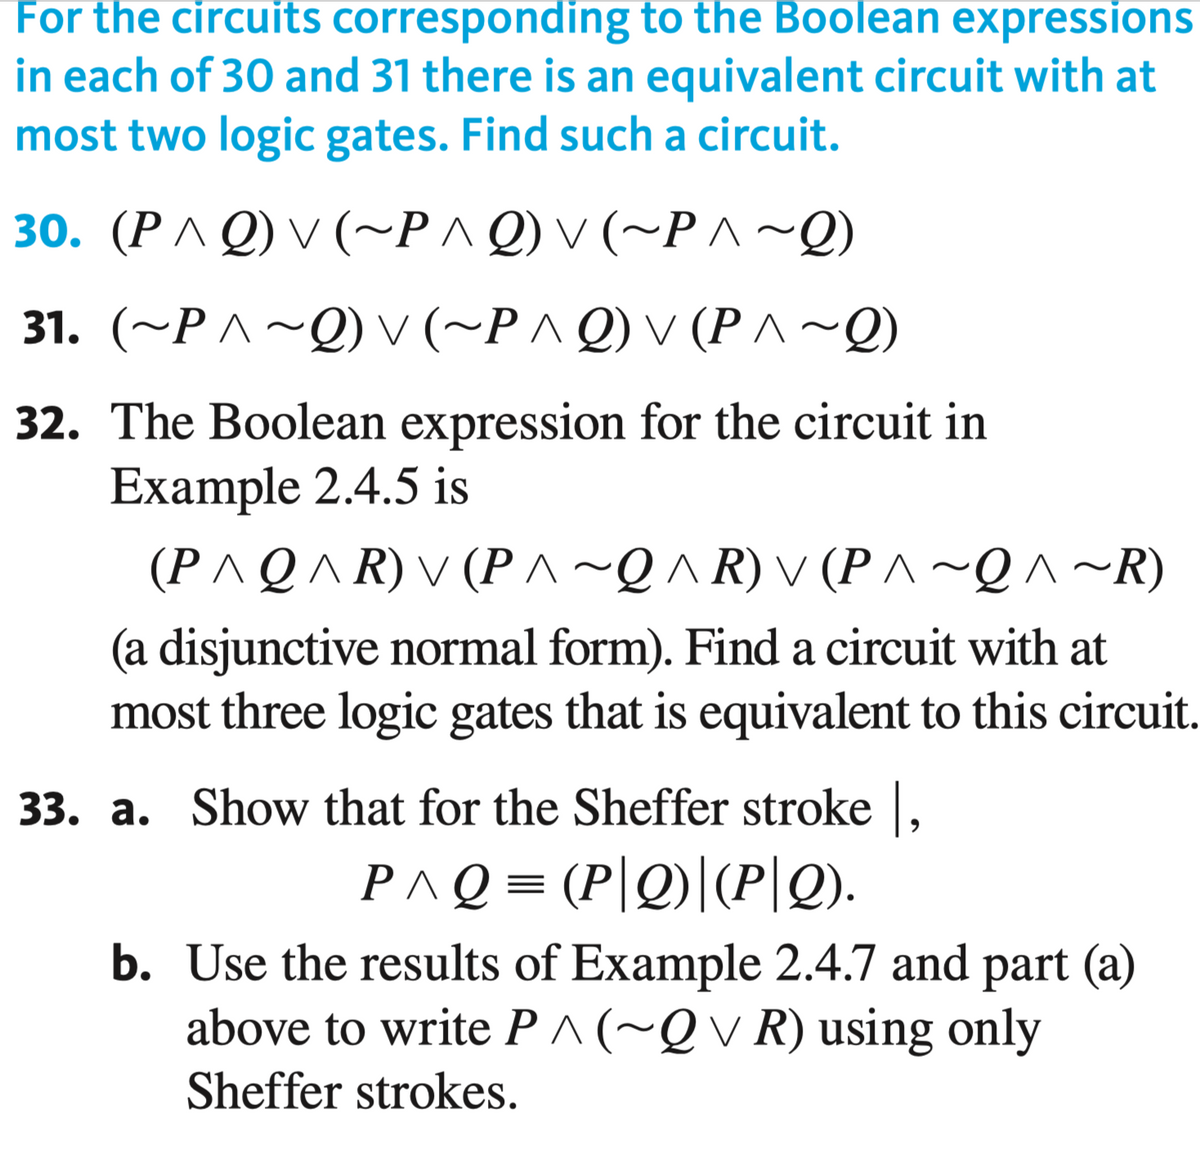 For the circuits corresponding to the Boolean expressions
in each of 30 and 31 there is an equivalent circuit with at
most two logic gates. Find such a circuit.
30. (PA Q) v (~P^Q) v (~P ^~Q)
31. (~P ^~Q) v (~P^ Q) v (P^~Q)
32. The Boolean expression for the circuit in
Example 2.4.5 is
(P^Q^ R) V (P ^~Q^ R) V (P ^ ~Q ^ ~R)
(a disjunctive normal form). Find a circuit with at
most three logic gates that is equivalent to this circuit.
33. a. Show that for the Sheffer stroke ,
PAQ = (P|Q)|(P|Q).
b. Use the results of Example 2.4.7 and part (a)
above to write P^(~Qv R) using only
Sheffer strokes.
